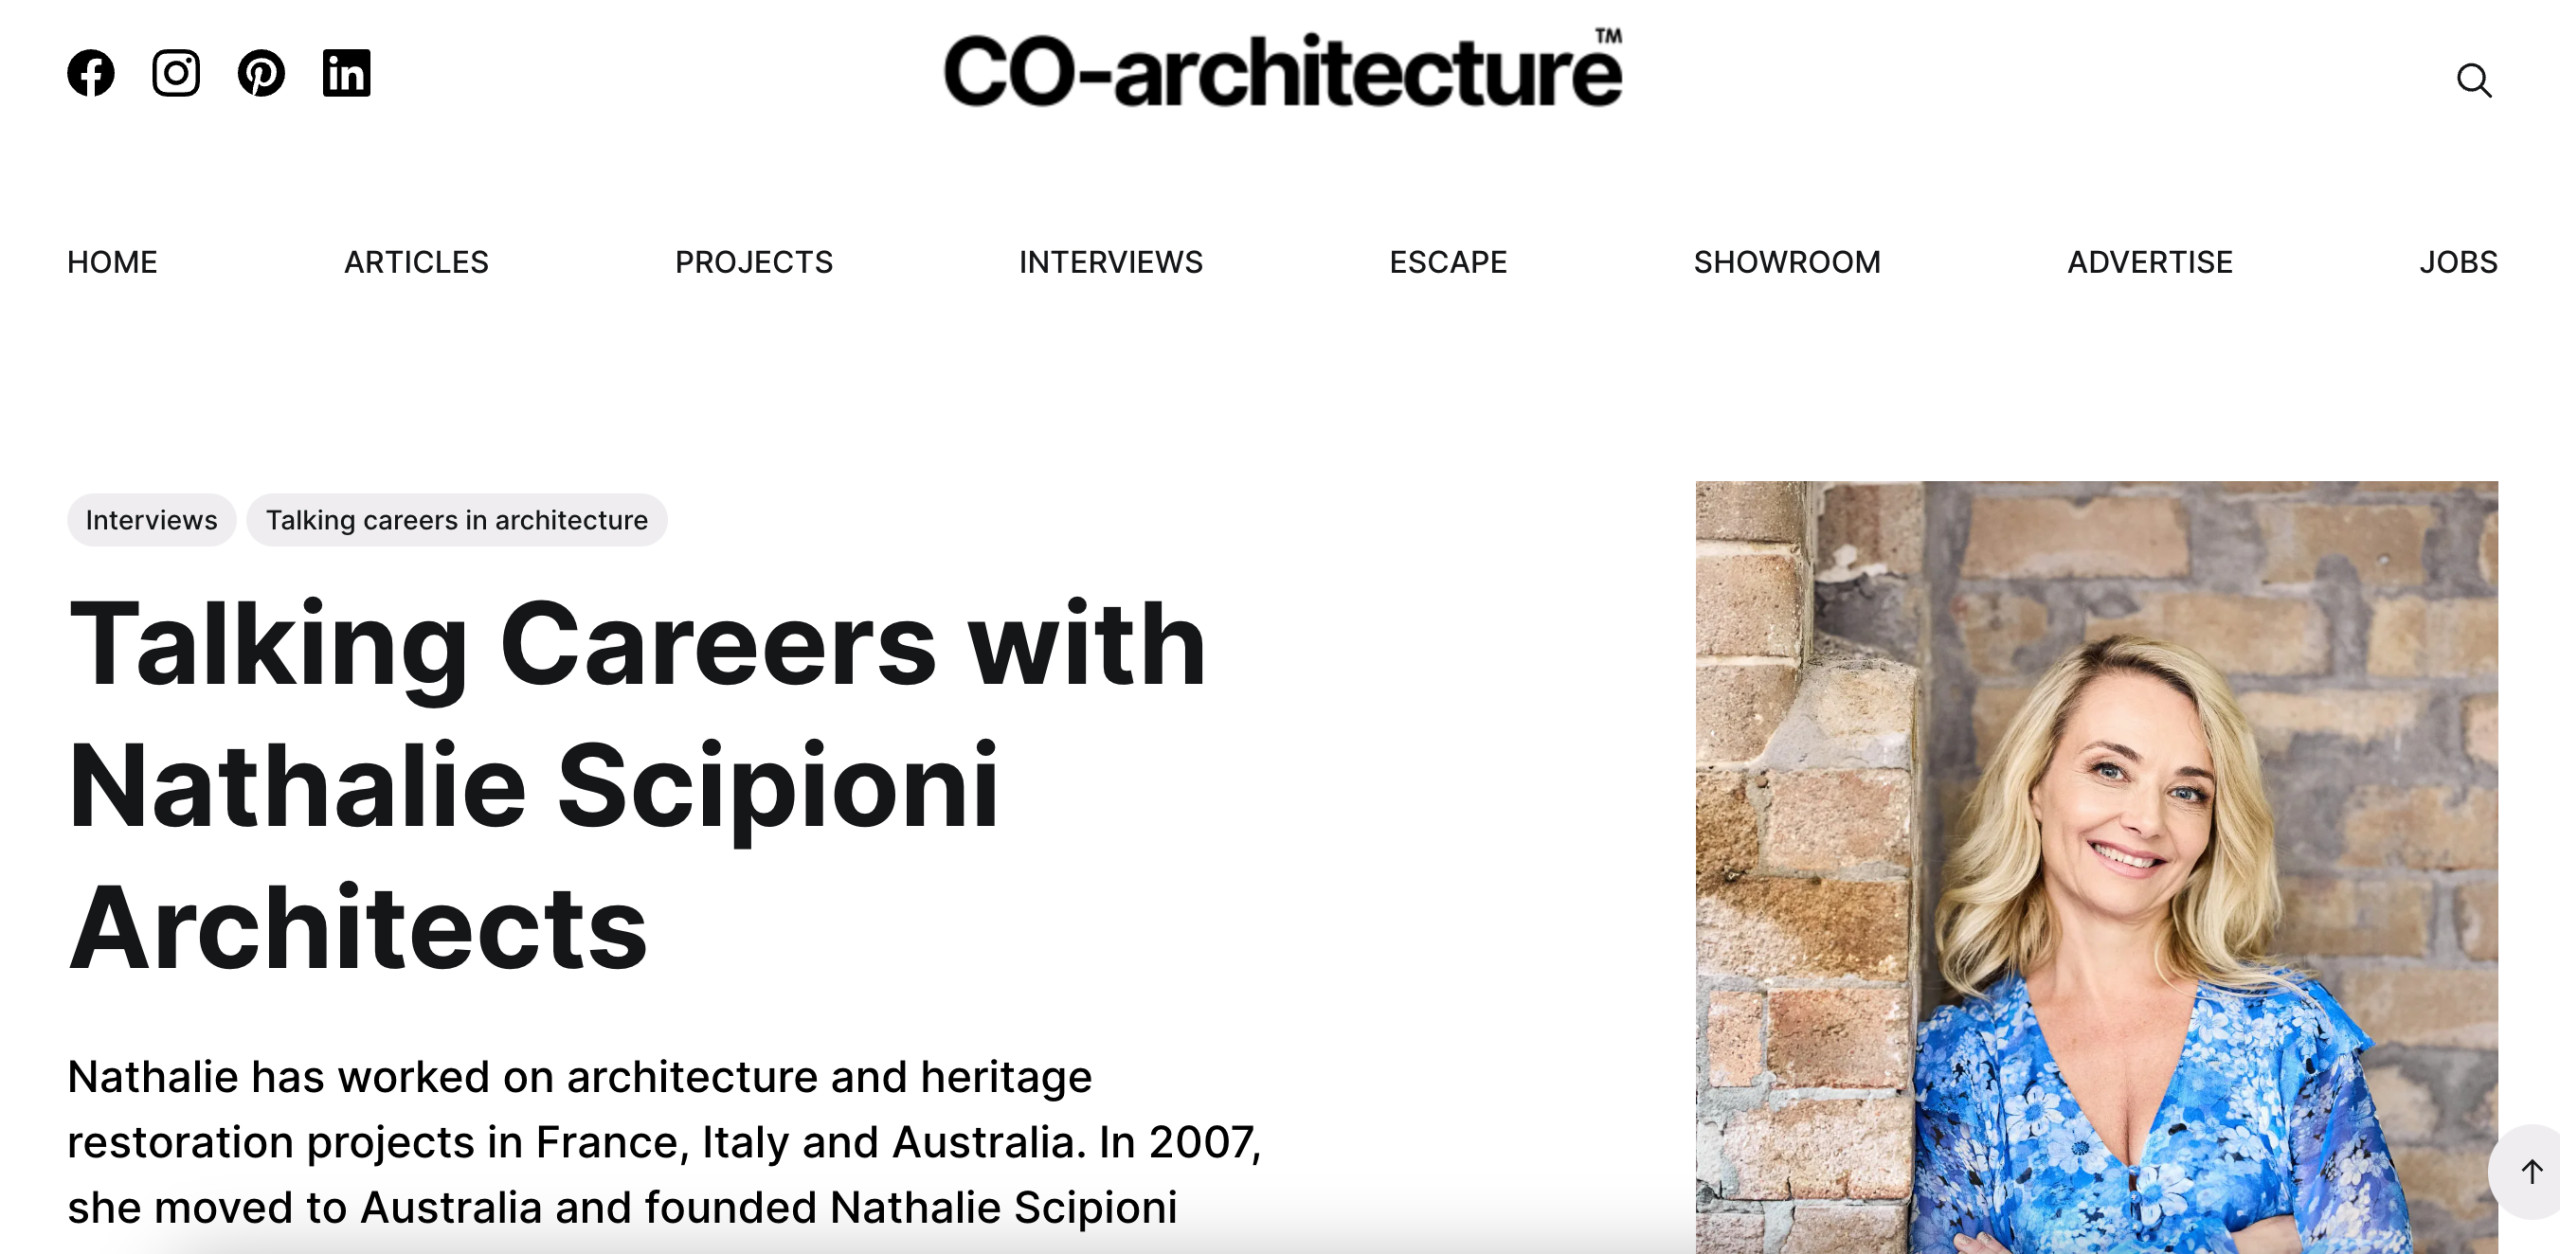 IN THE MEDIA | CO-architecture Feature - Talking Careers with Nathalie Scipioni